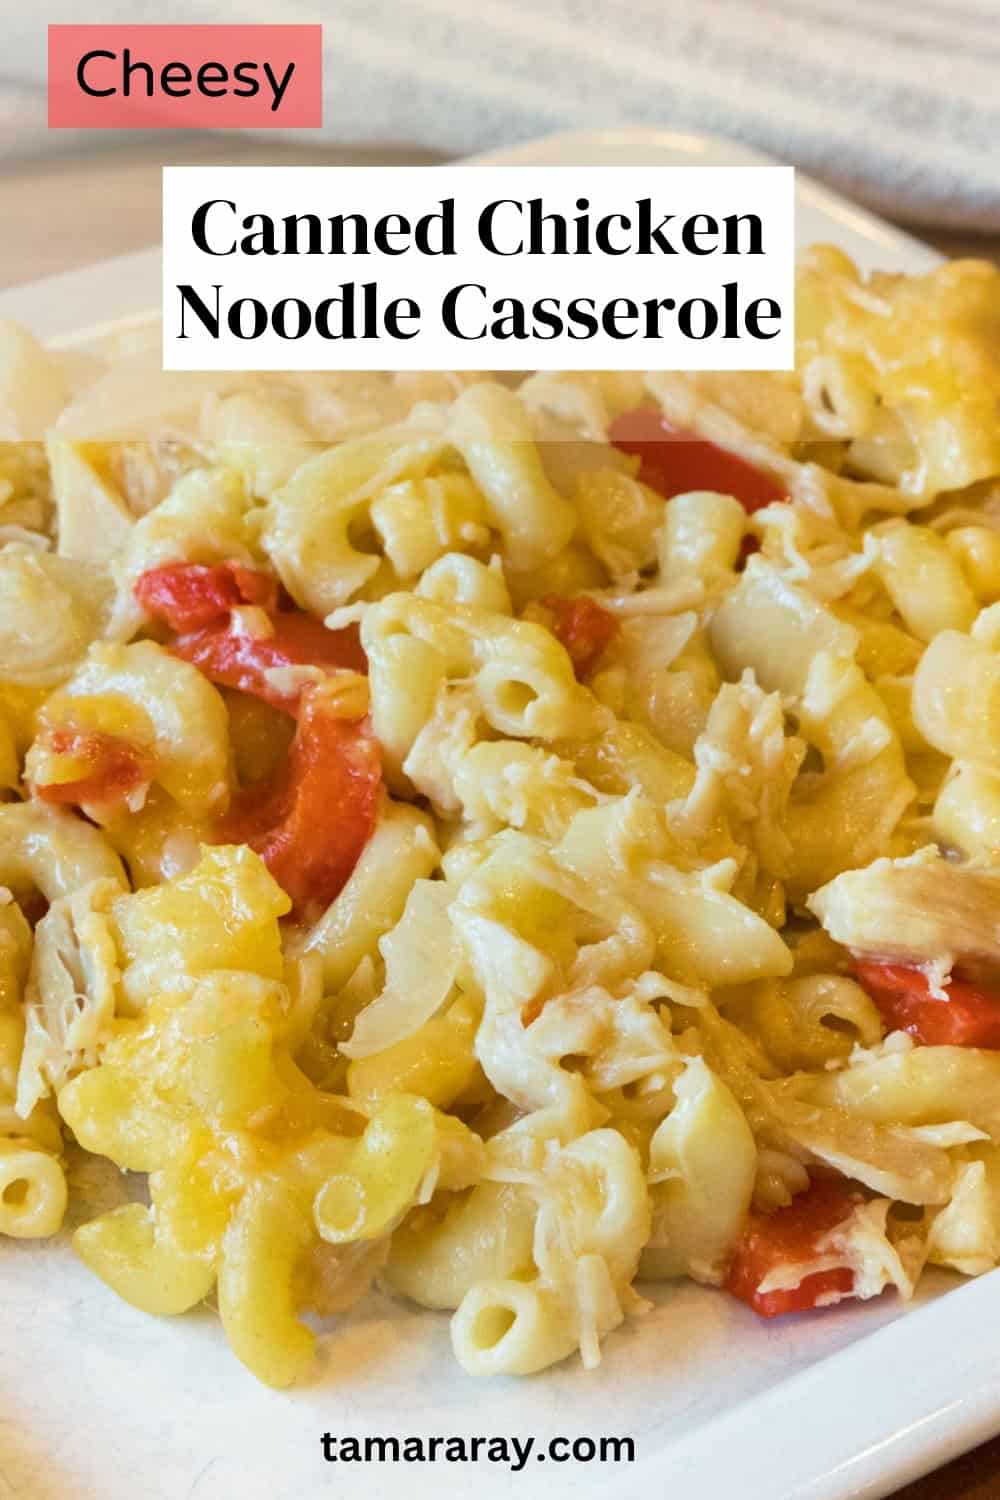 Baked cheesy canned chicken noodle casserole on a plate.